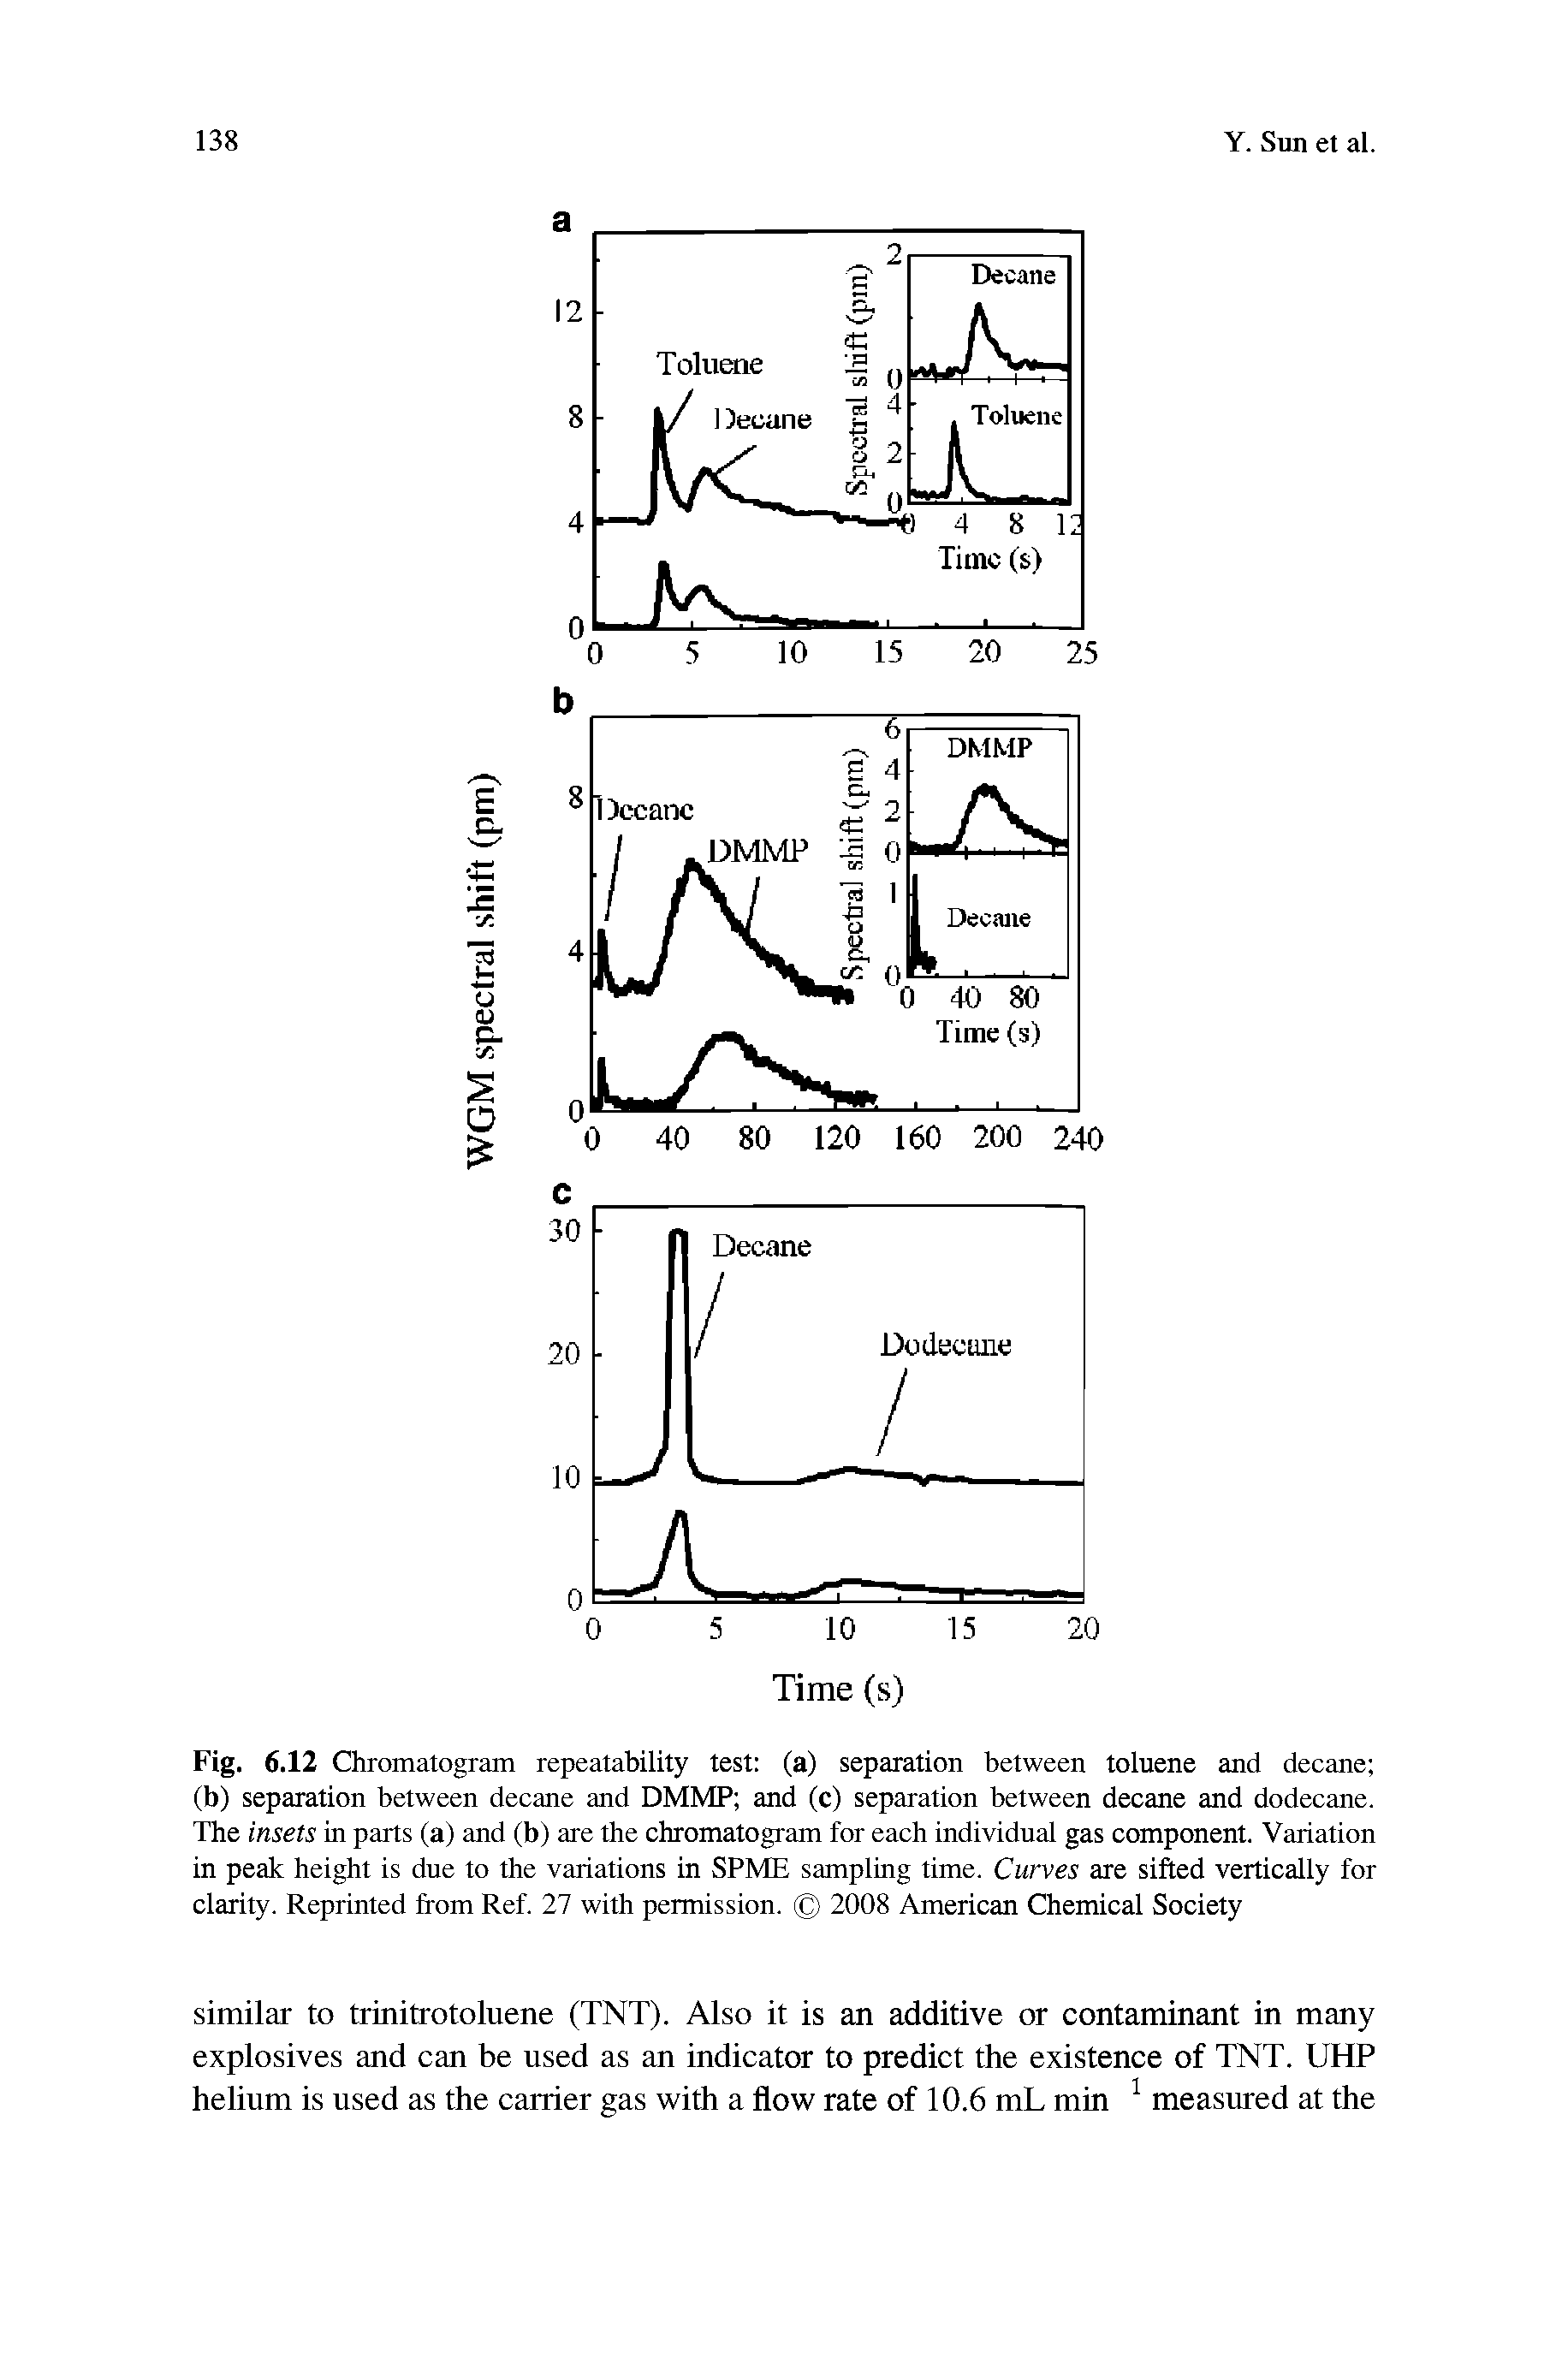 Fig. 6.12 Chromatogram repeatability test (a) separation between toluene and decane (b) separation between decane and DMMP and (c) separation between decane and dodecane. The insets in parts (a) and (b) are the chromatogram for each individual gas component. Variation in peak height is due to the variations in SPME sampling time. Curves are sifted vertically for clarity. Reprinted from Ref. 27 with permission. 2008 American Chemical Society...